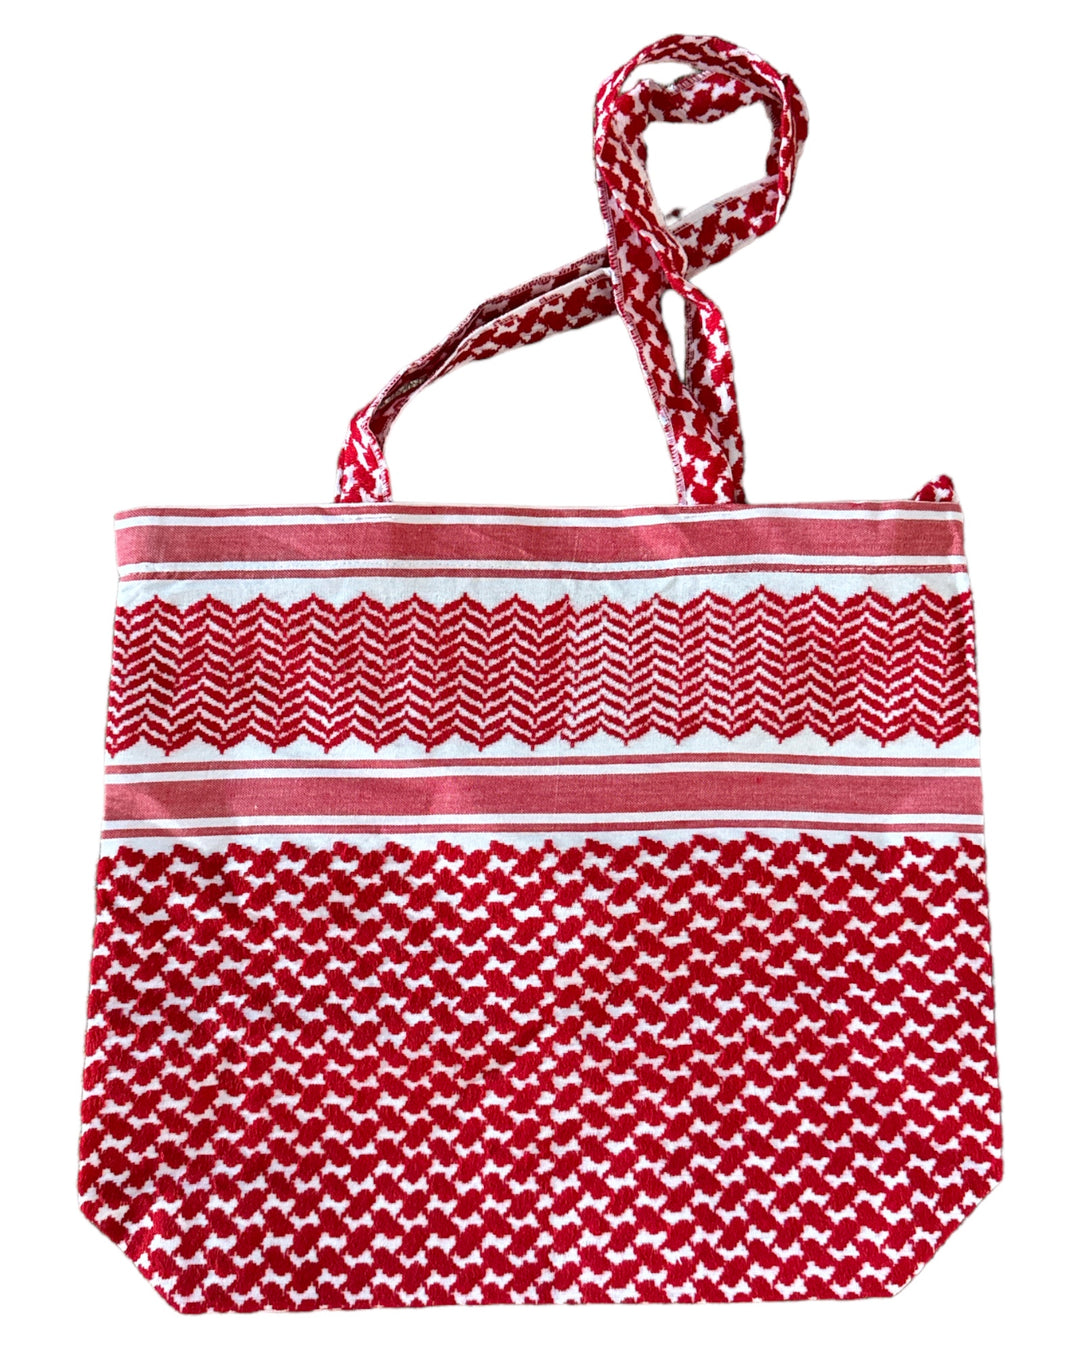 The Red Keffiyeh Tote Handbag – A Tapestry of Craftsmanship and Heritage